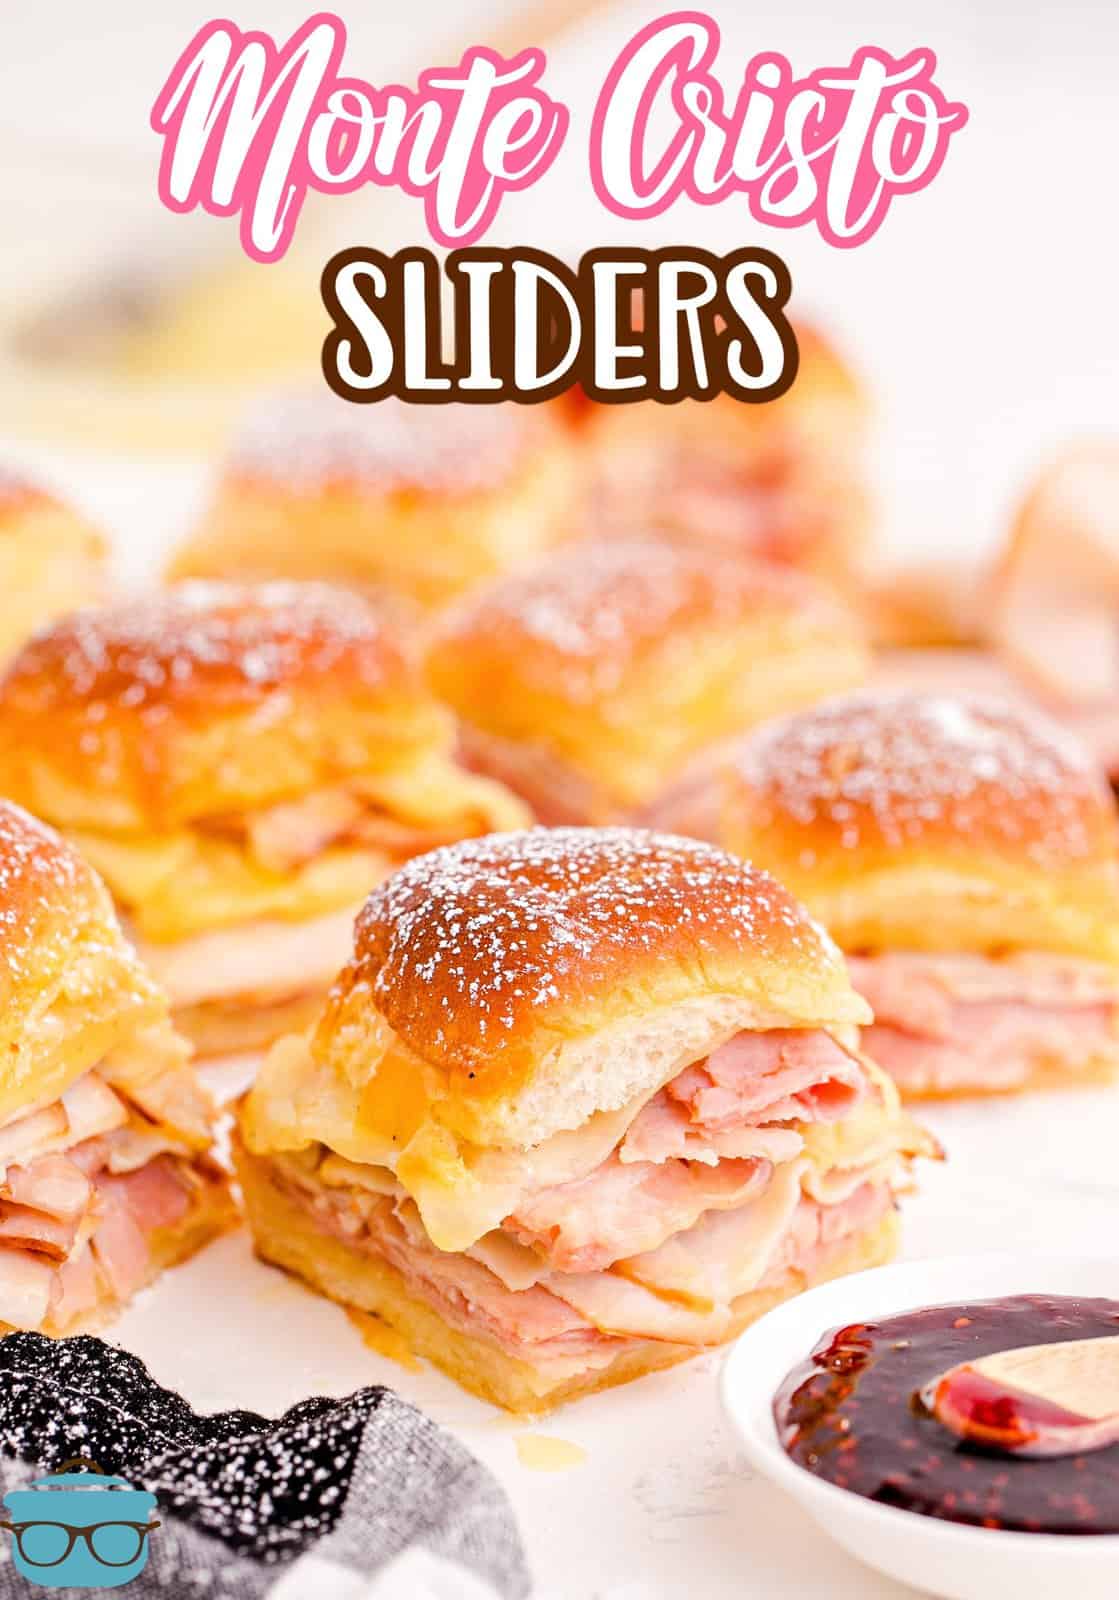 Pinterest image of cut up and spread out Monte Cristo Sliders with preserves in front.